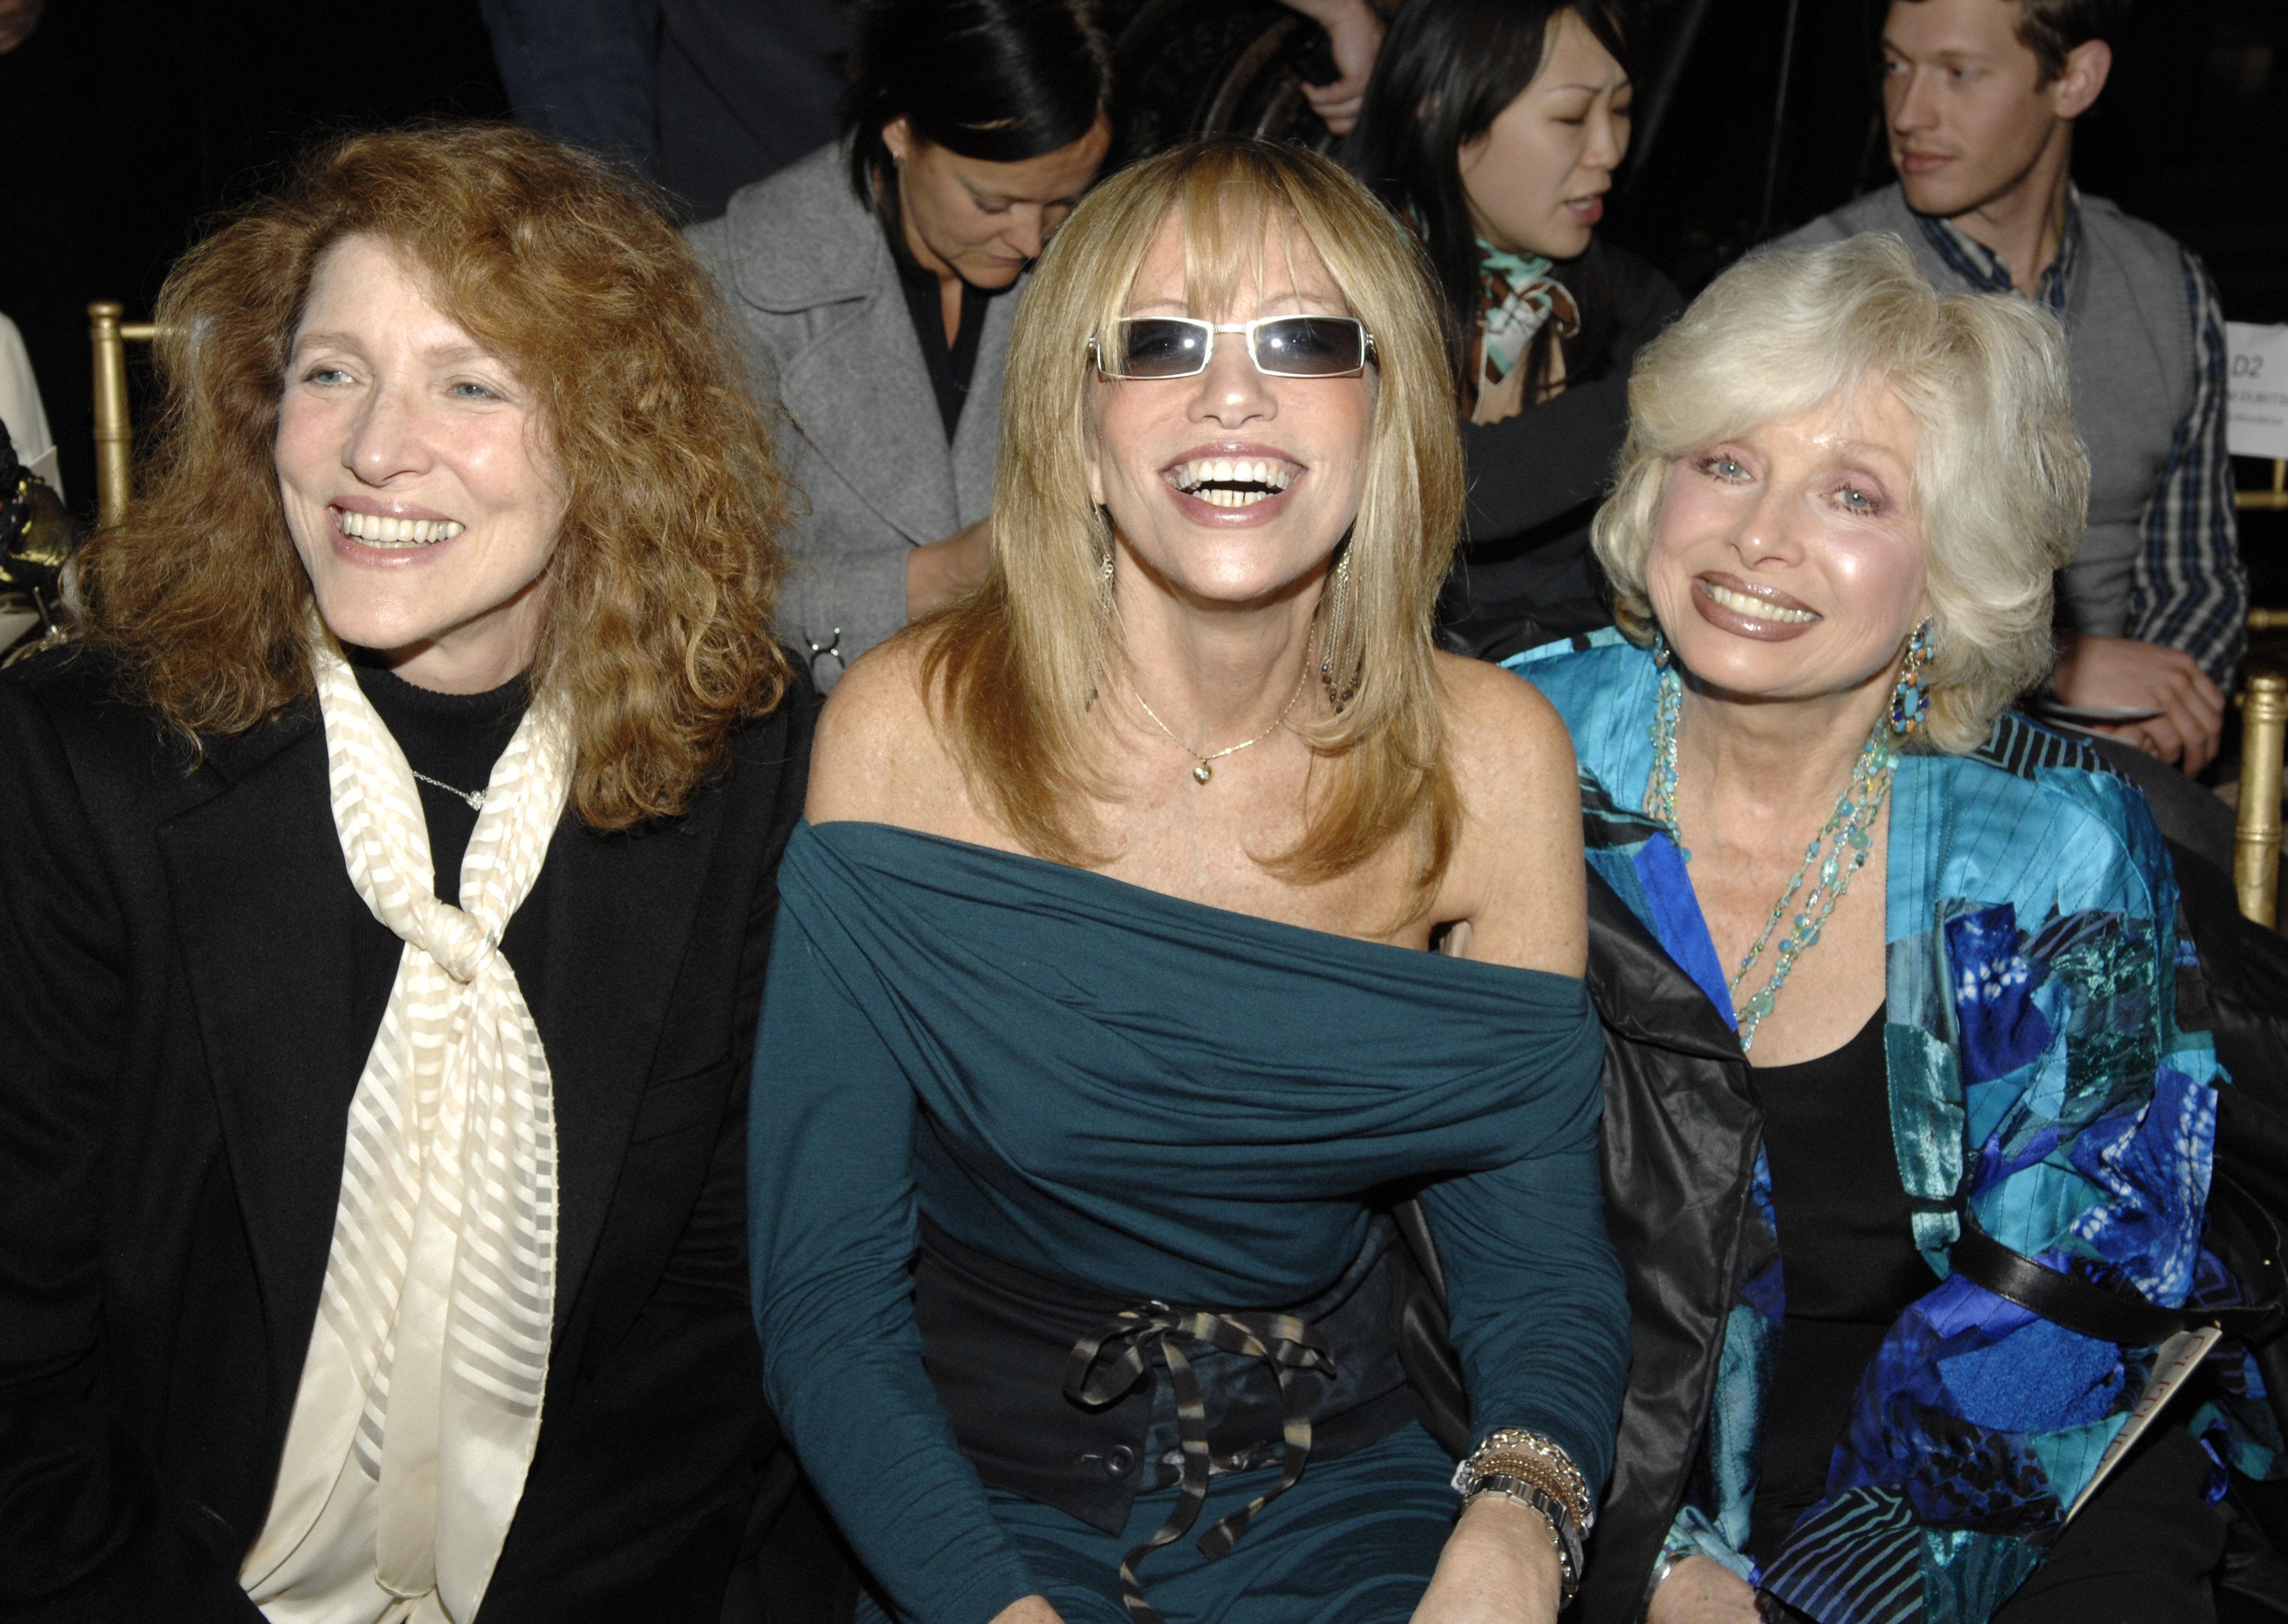 Lucy Simon, Carley Simon and Joanna Simon attend Future Fashion Runway Show on January 31, 2008 at Gotham Hall in New York City ┃Source: Getty Images